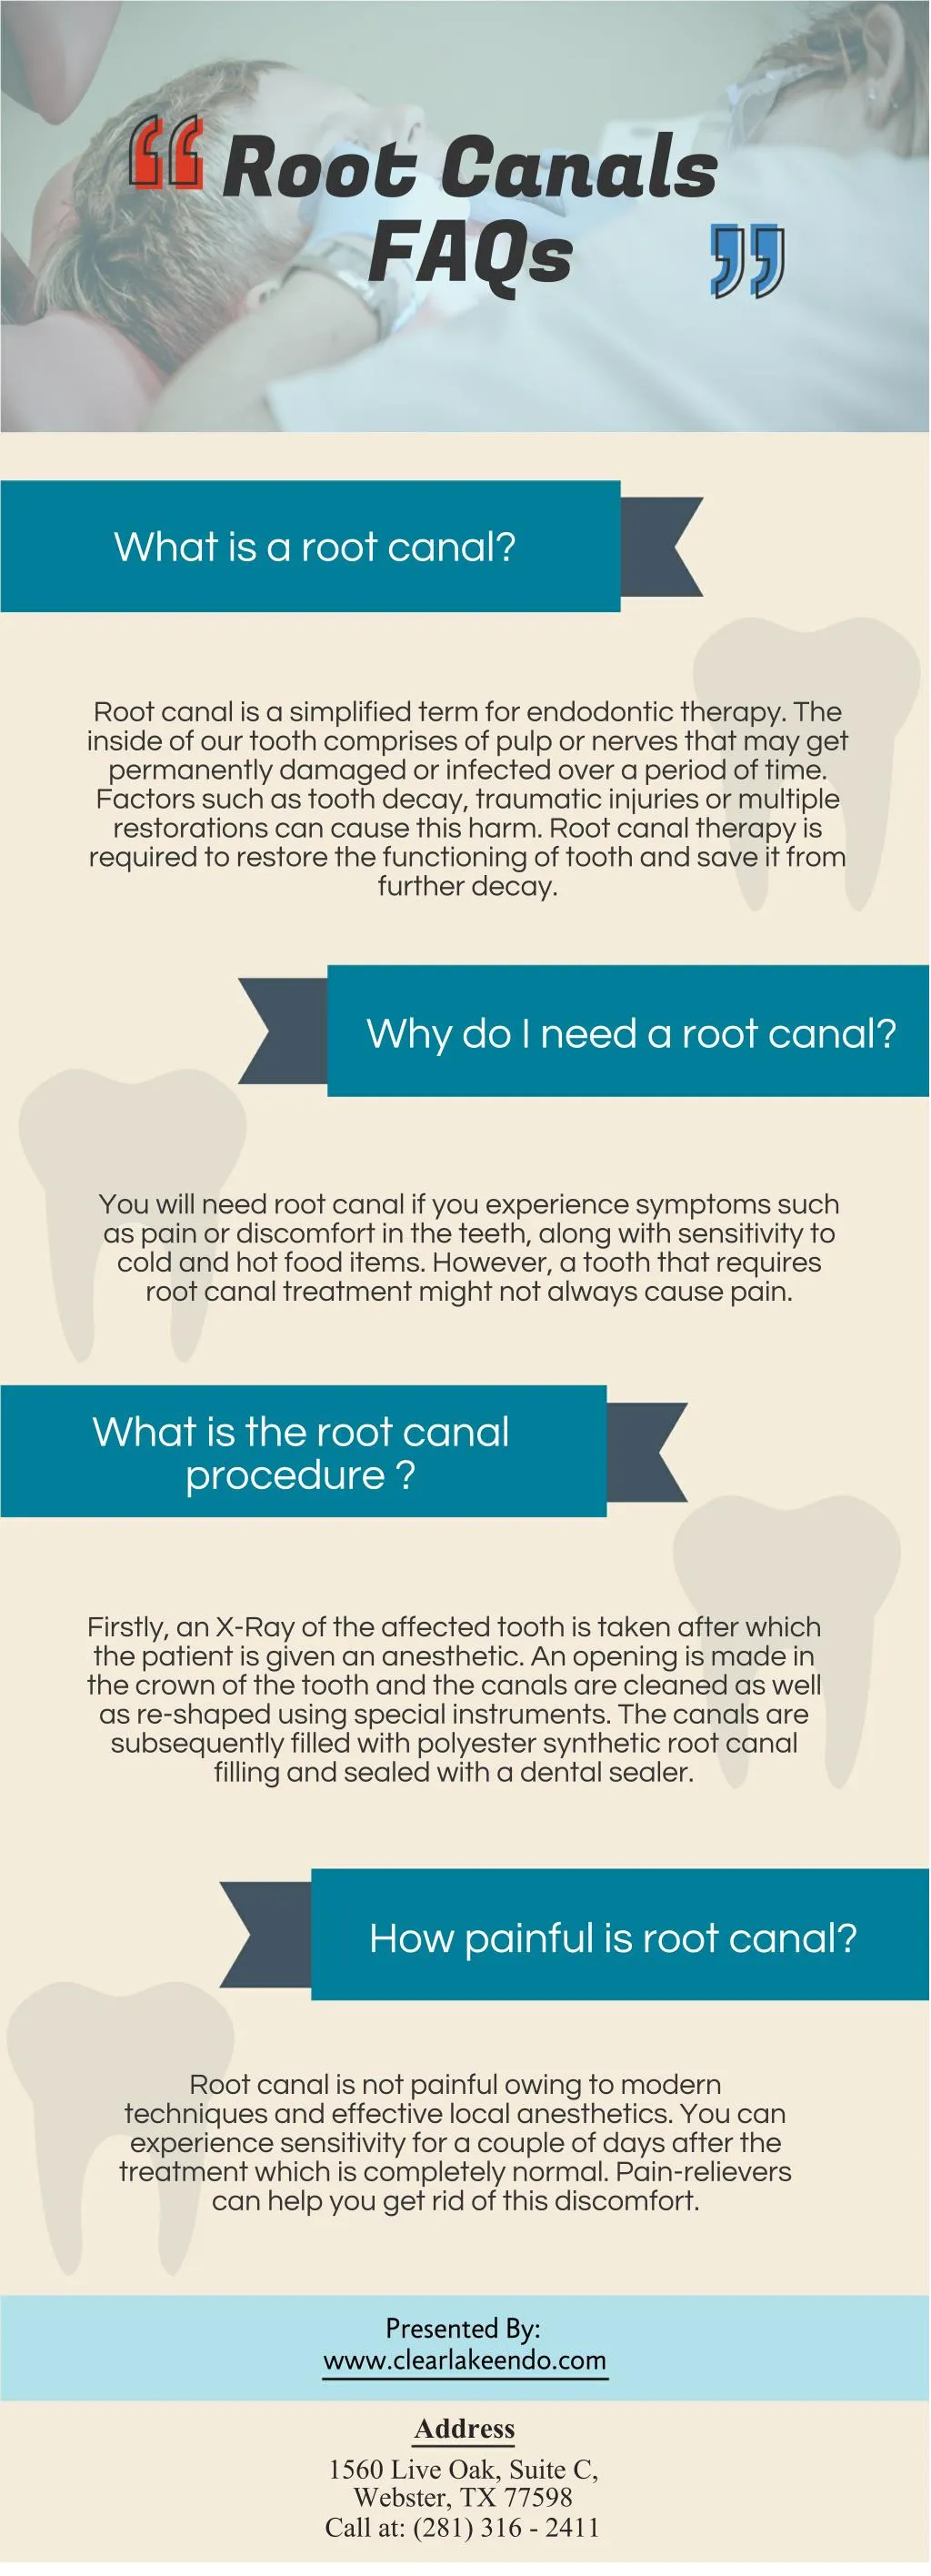 root canals faqs